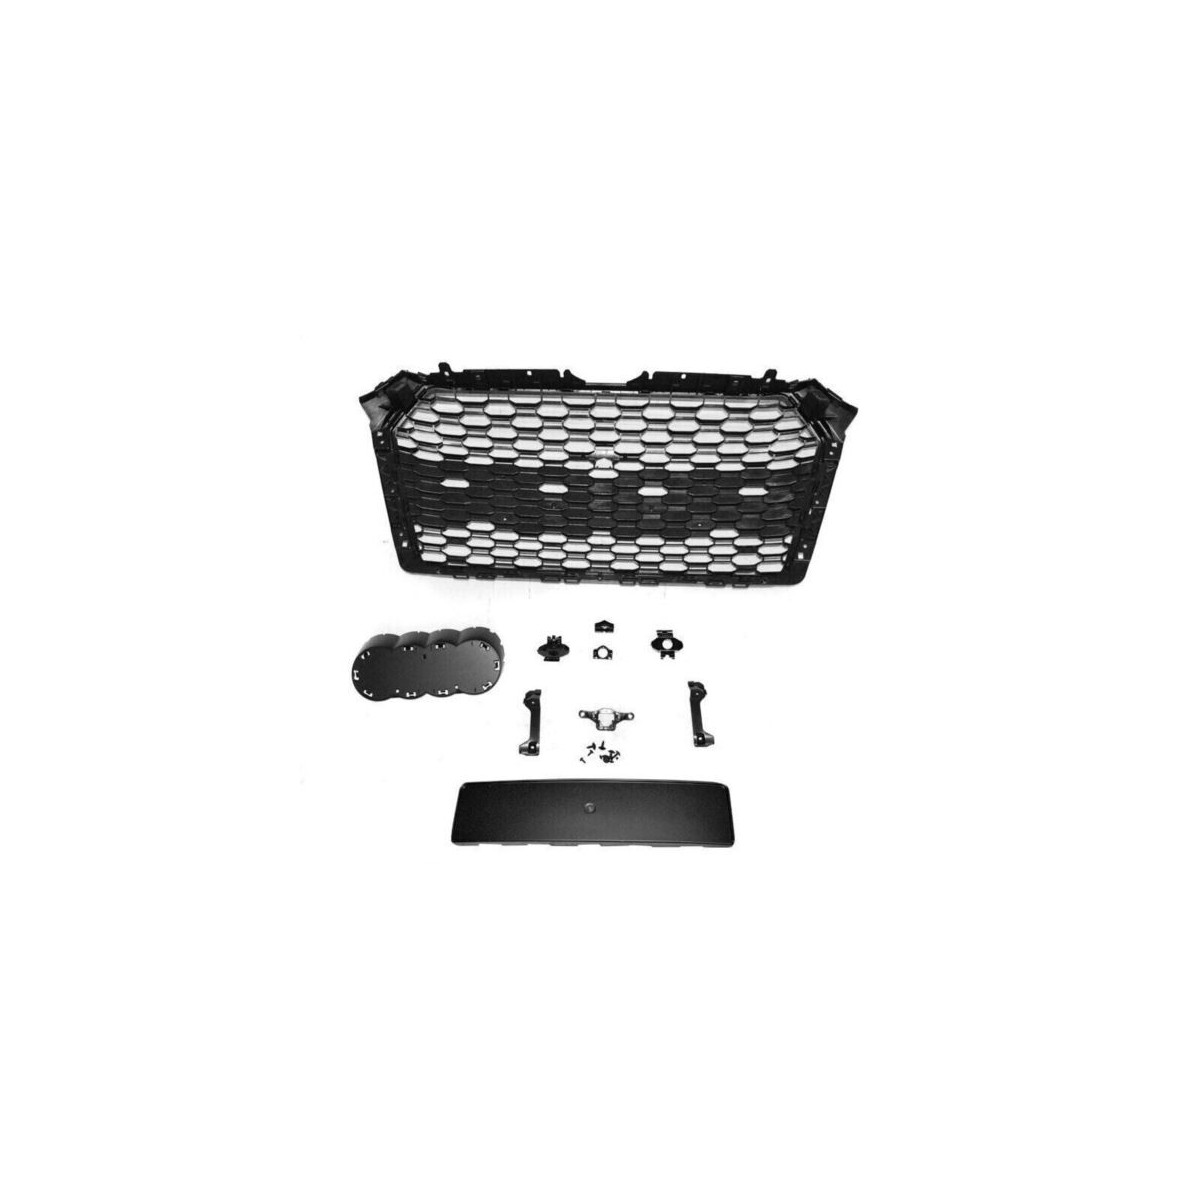 GRILL AUDI A4 B9 15-19 GLOSSY BLACK RS4 STYLE PDC